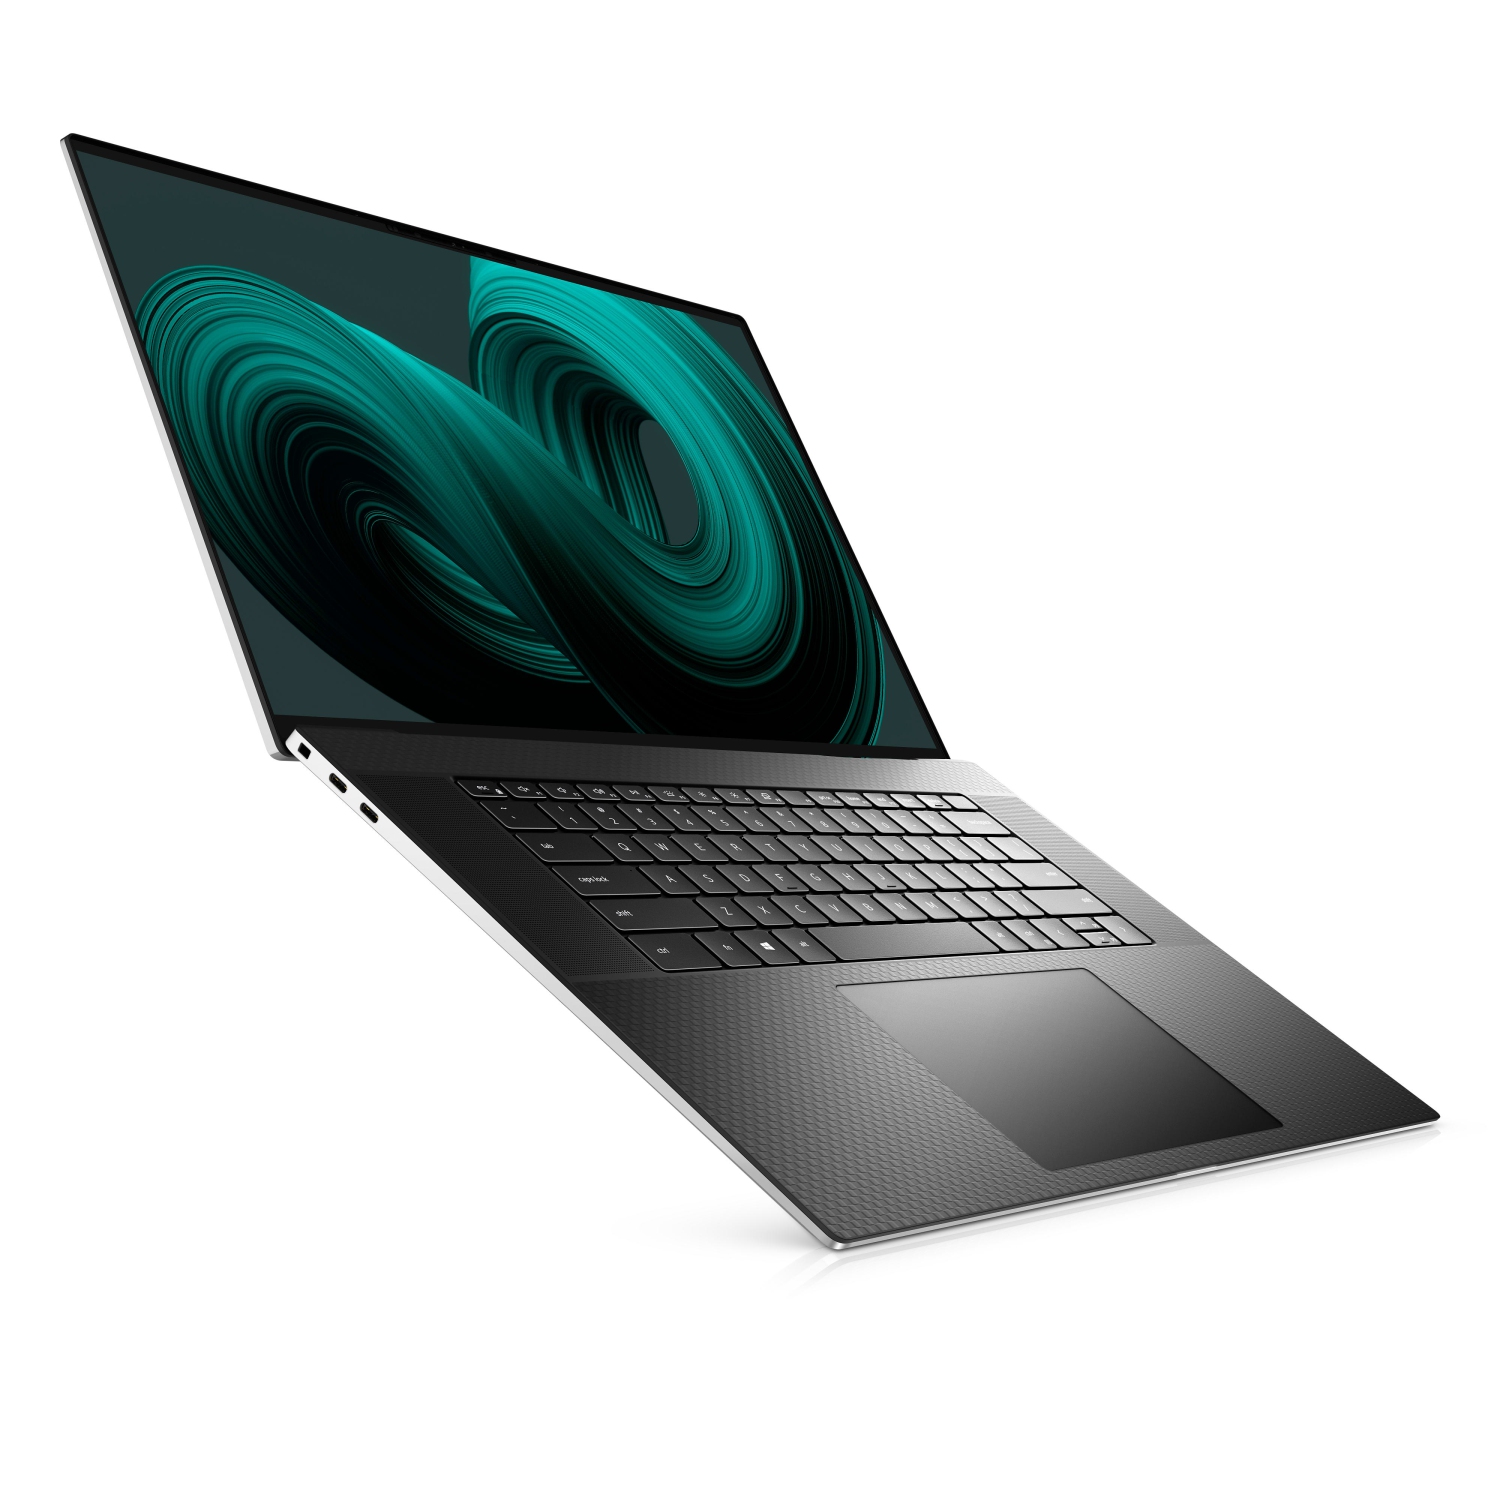 Refurbished (Excellent) - Dell XPS 17 9710 Laptop (2021) | 17" 4K Touch | Core i7 - 1TB SSD - 64GB RAM - RTX 3060 | 8 Cores @ 4.6 GHz - 11th Gen CPU Certified Refurbished